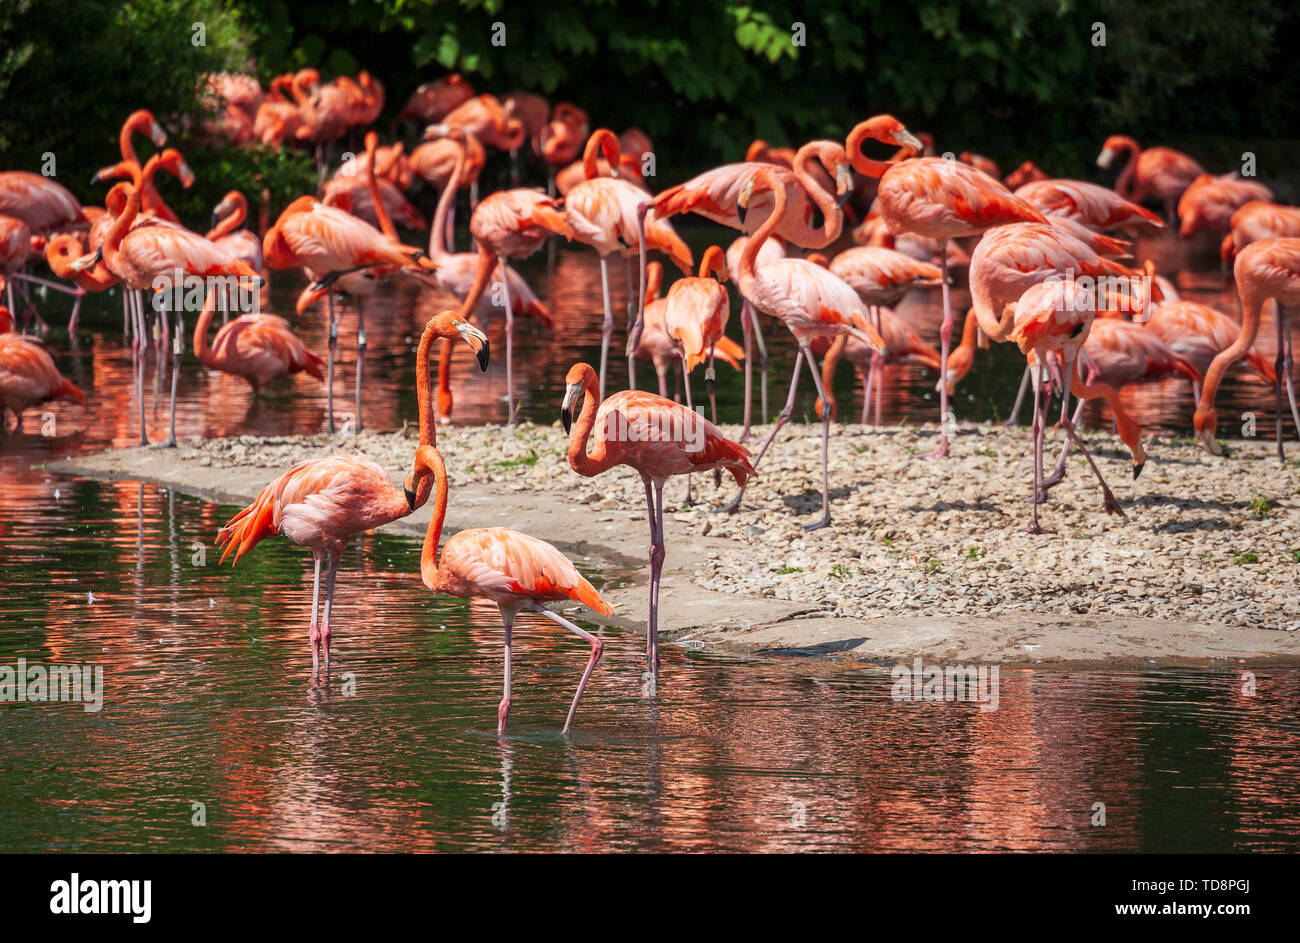 A flock of pink American Flamingos Stock Photo